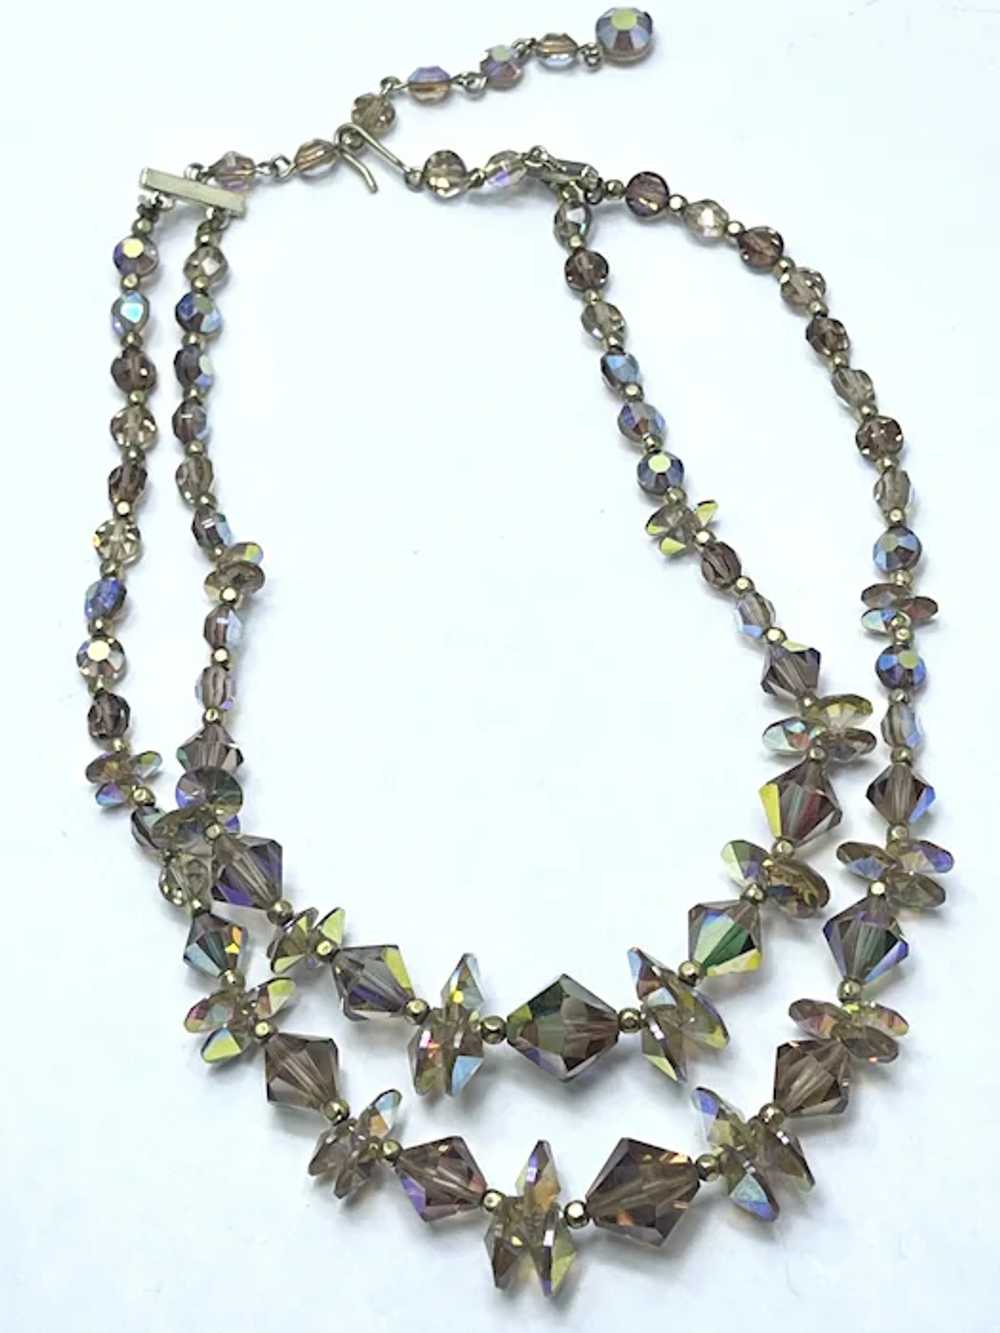 Vintage Faceted Crystal Glass Beaded Necklace - image 3